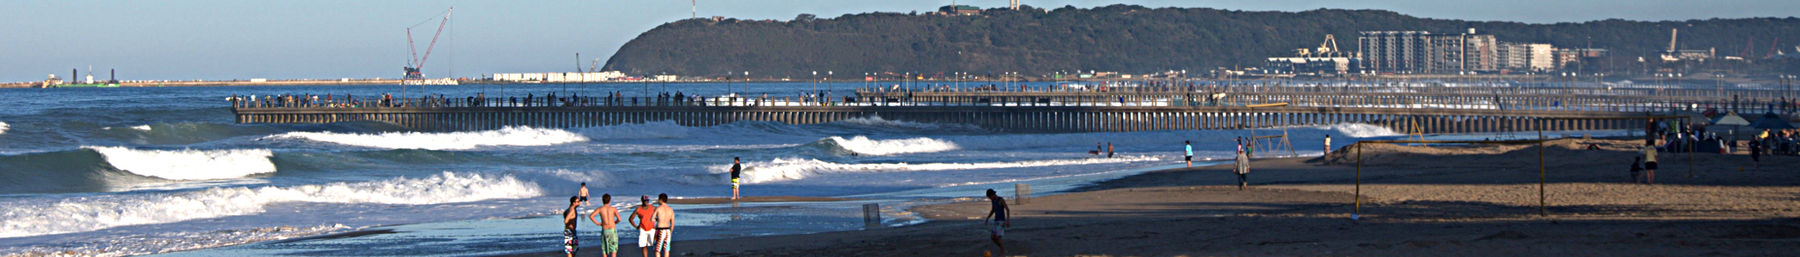 Durban banner Beachfront with piers and the bluff.JPG